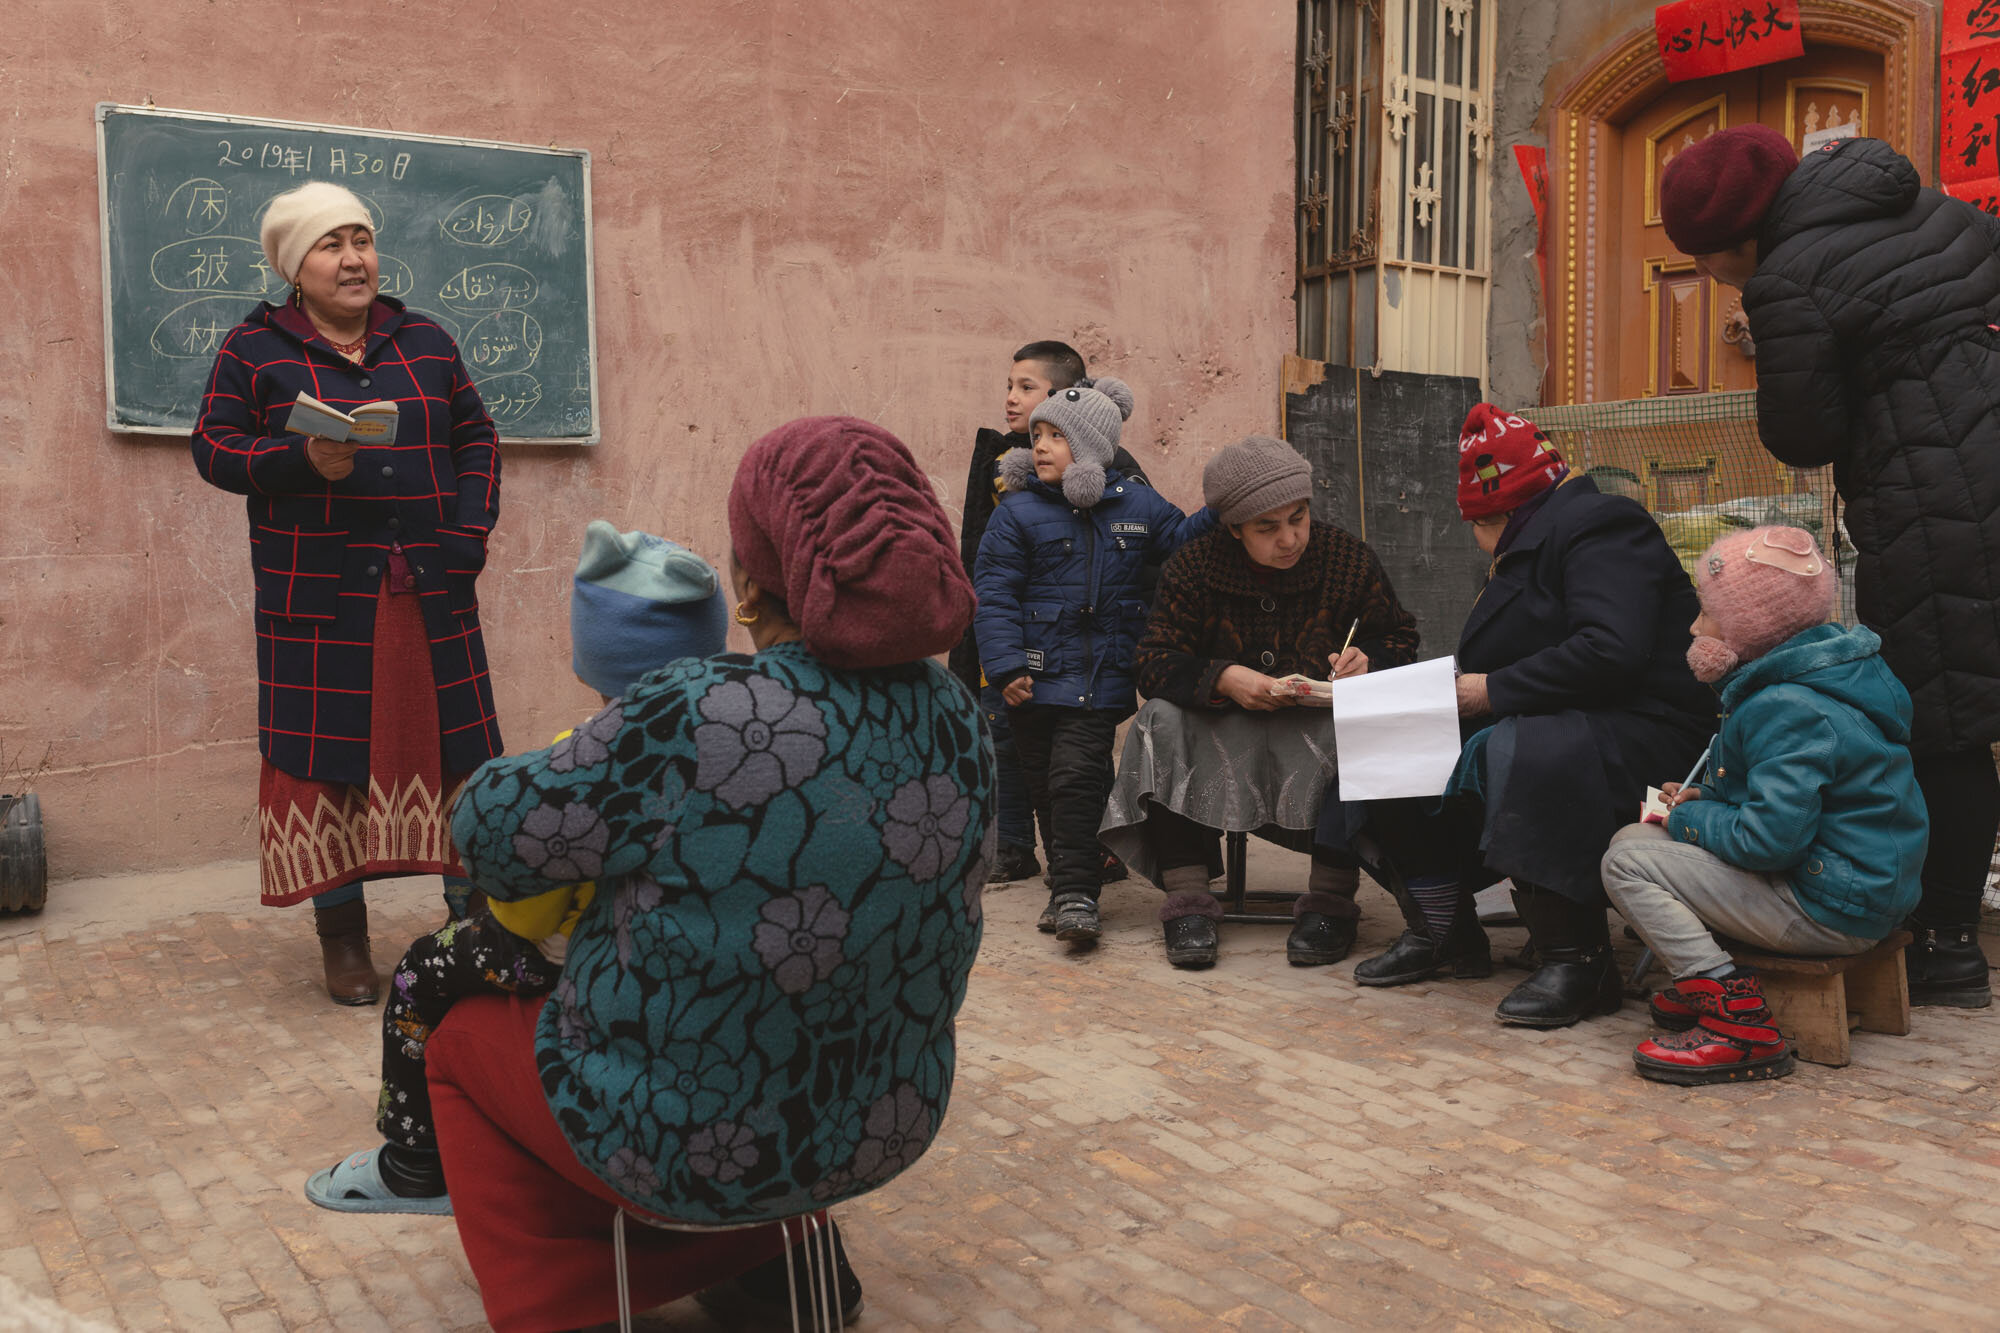  January 31st 2019. Kashgar, Xinjiang province. Uighur-minority residents - young and old - of a neighbourhood in the old town attend an outdoor Mandarin language class. 